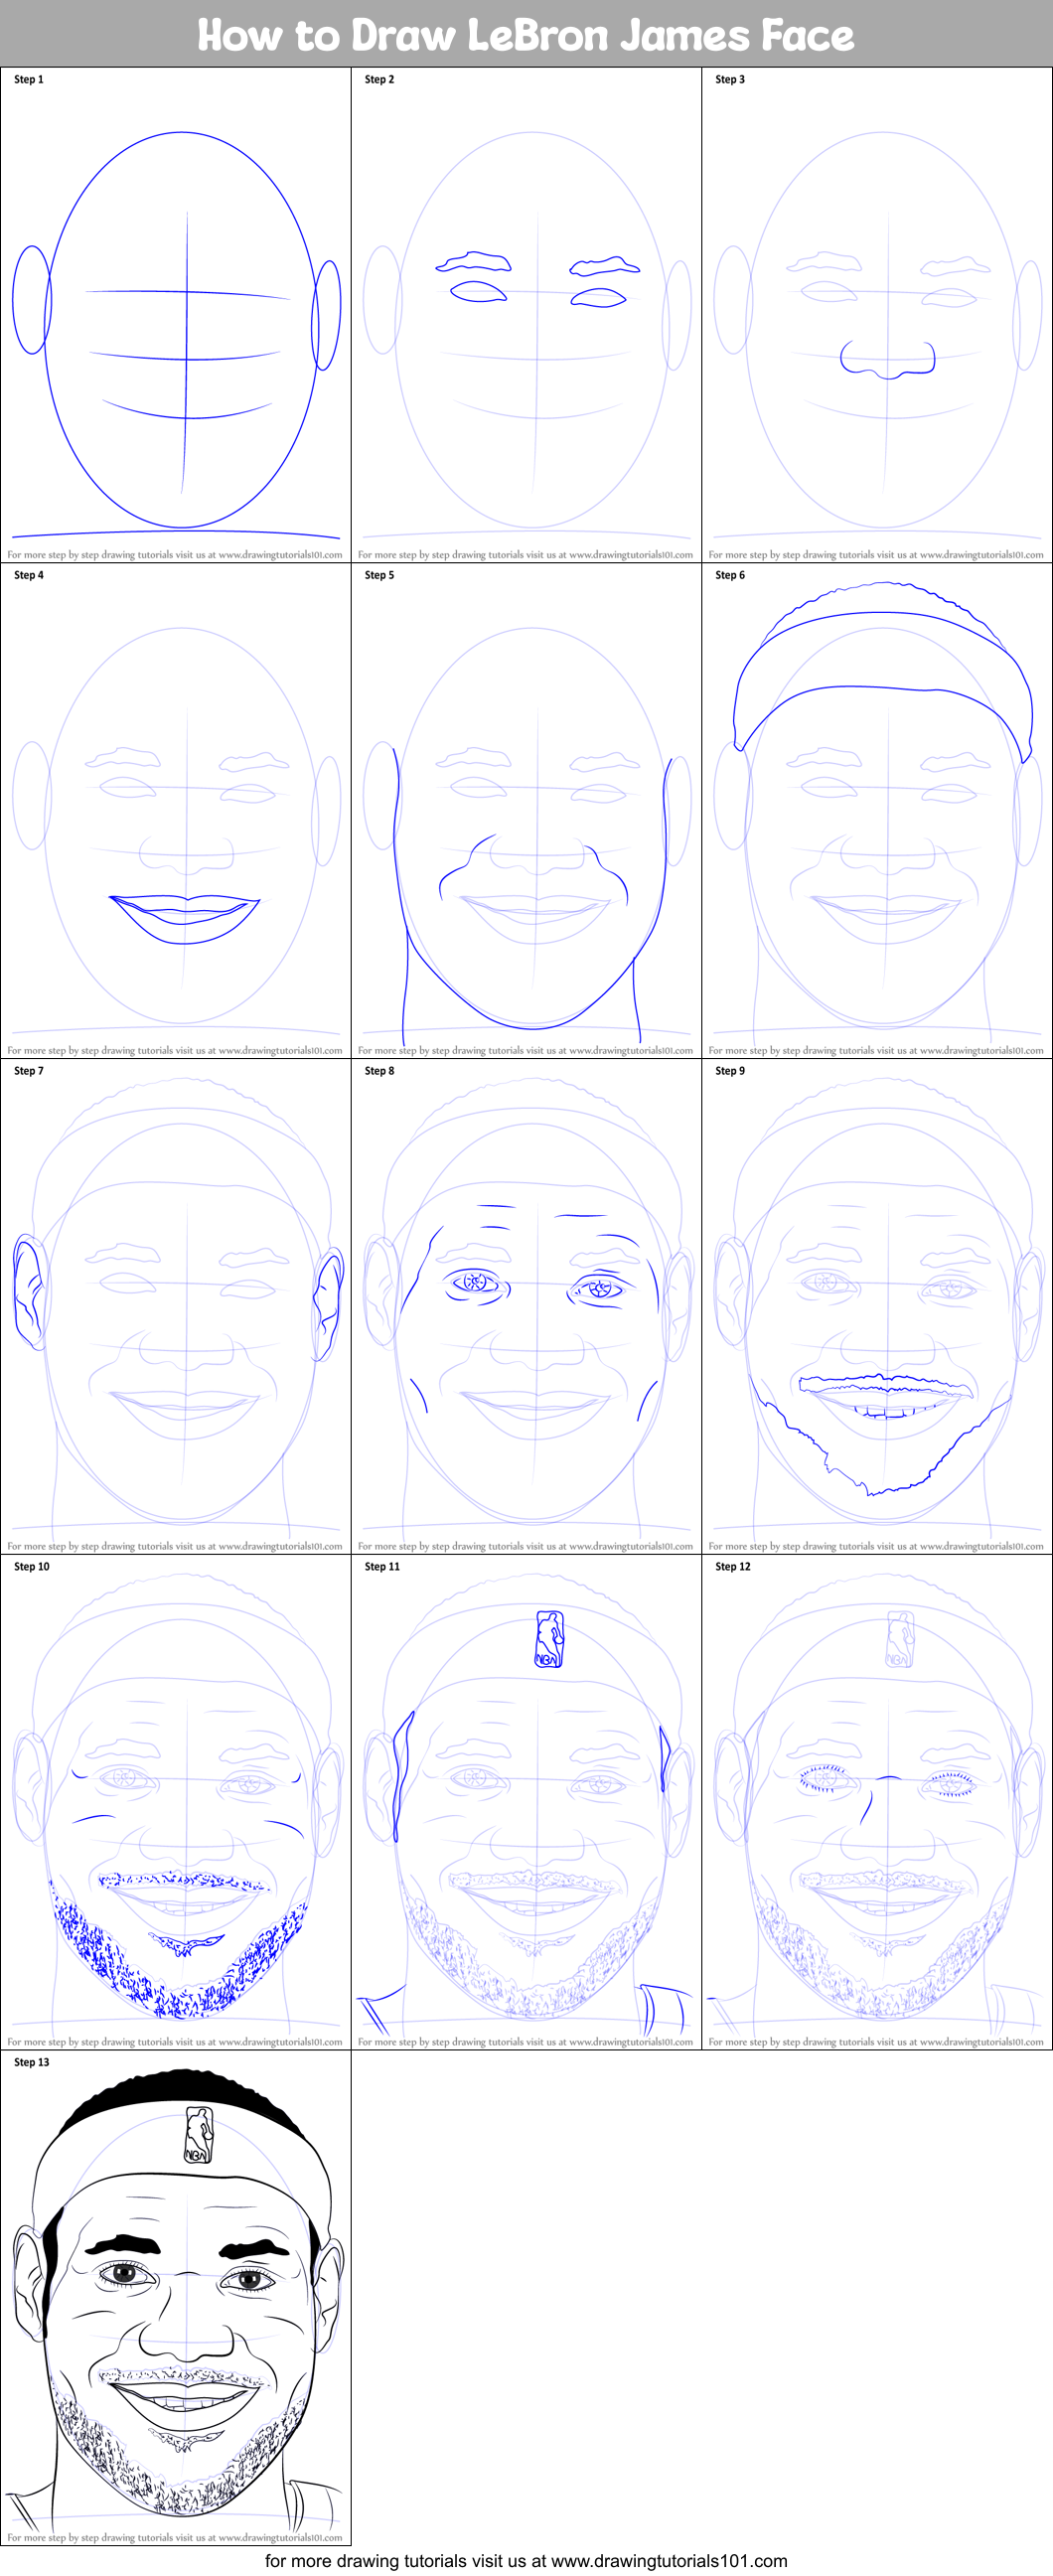 How to Draw Lebron James, Step-by-Step Tutorial 